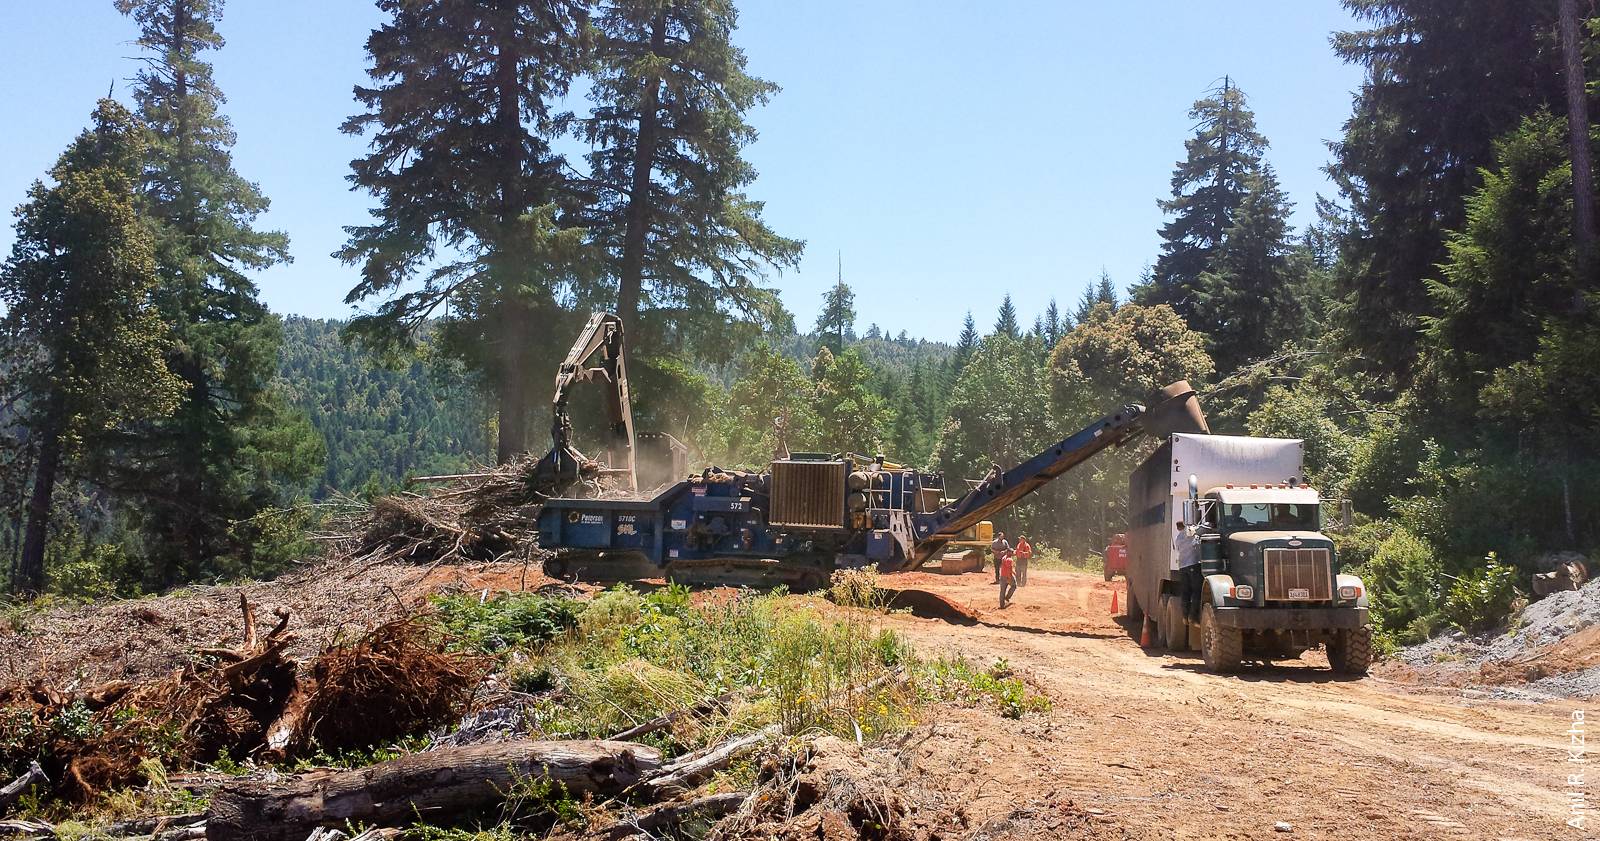 Forest residues are fed into a grinder at a centralized site and then loaded into a container for transport to the power plant. In Humboldt County, power plants use approximately 472,500 bone dry tons of biomass per year to generate electricity.